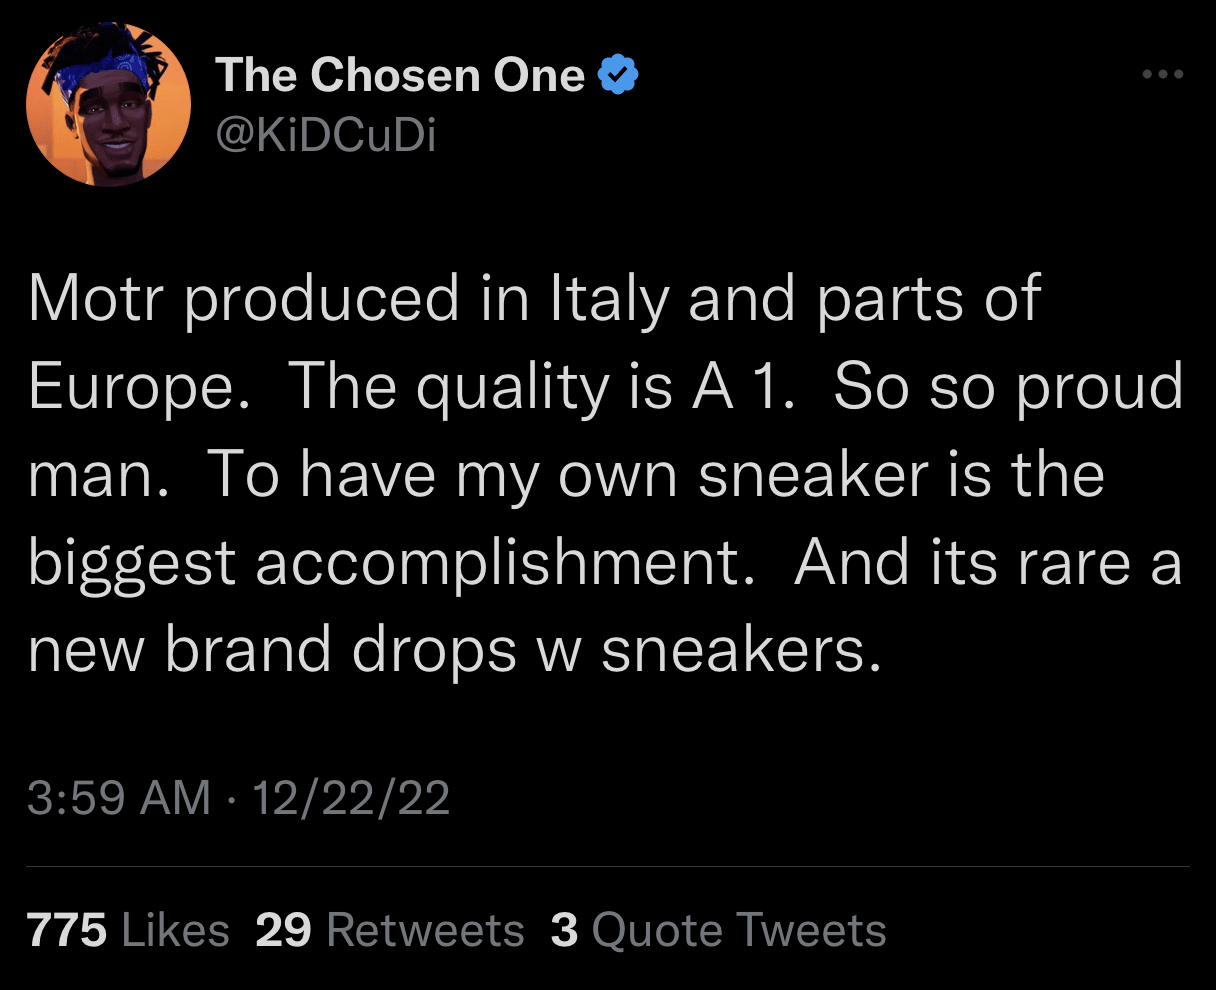 Cudi is seen tweeting about fashion line